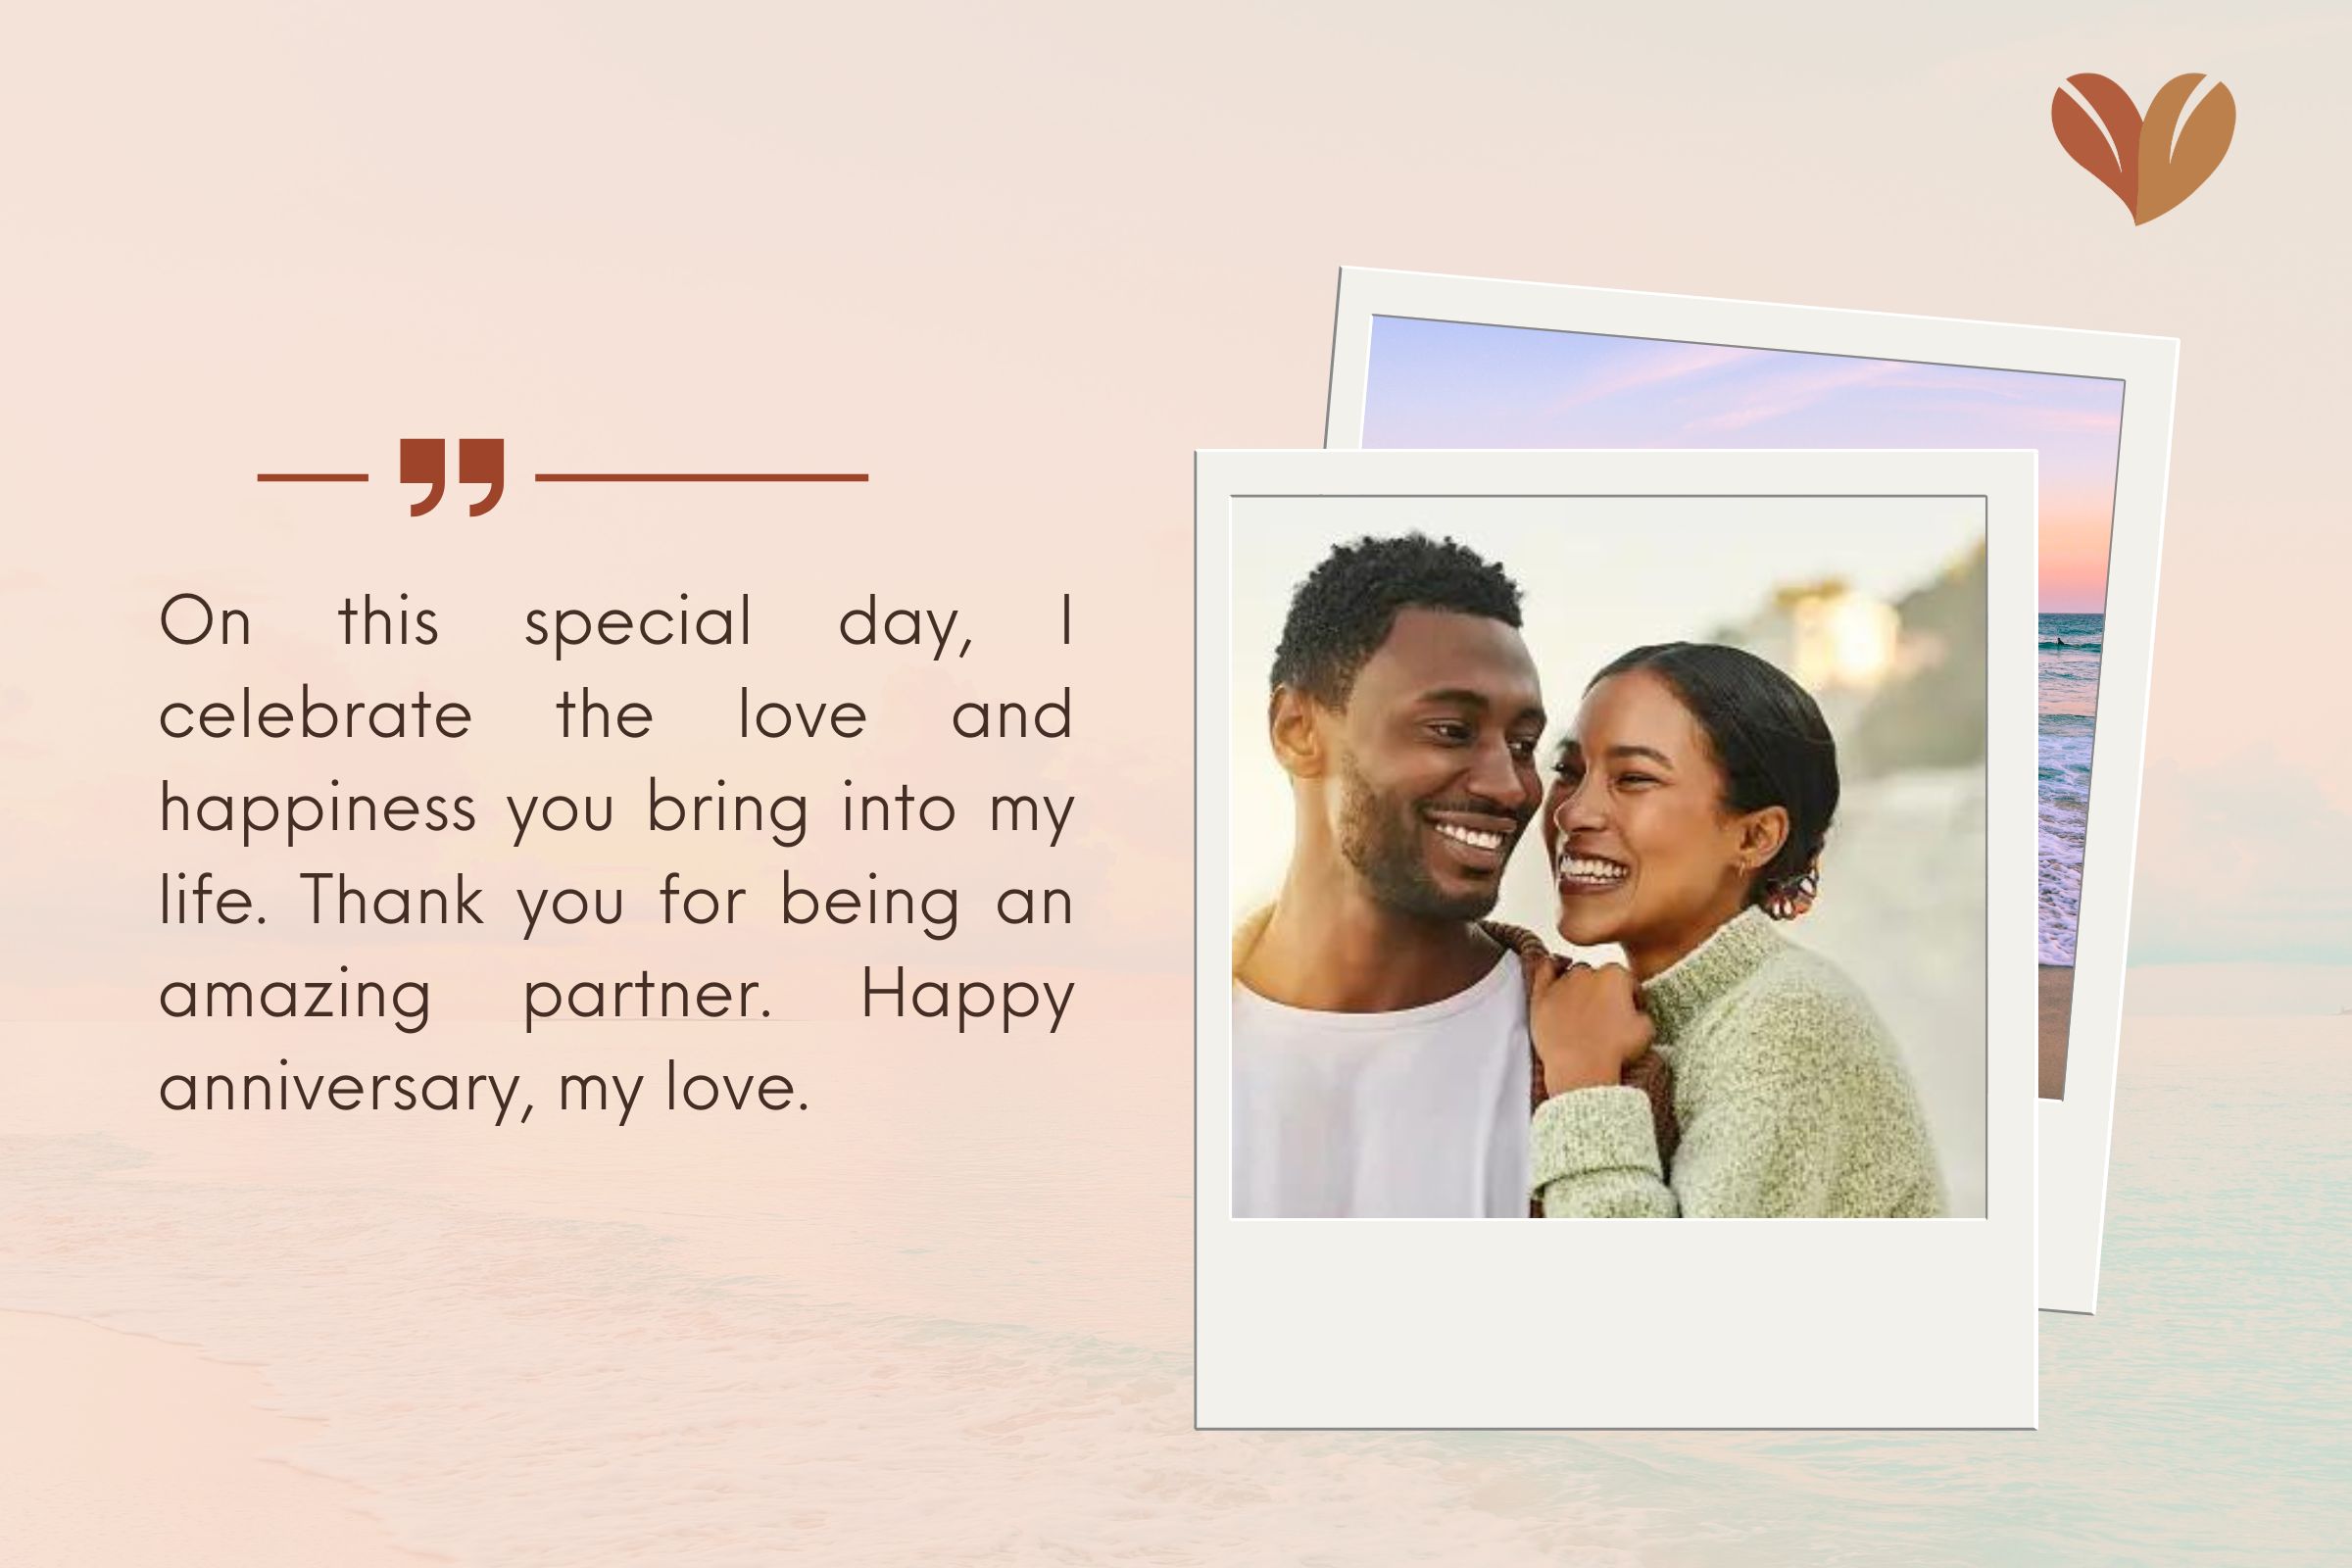 Anniversary messages for your lover